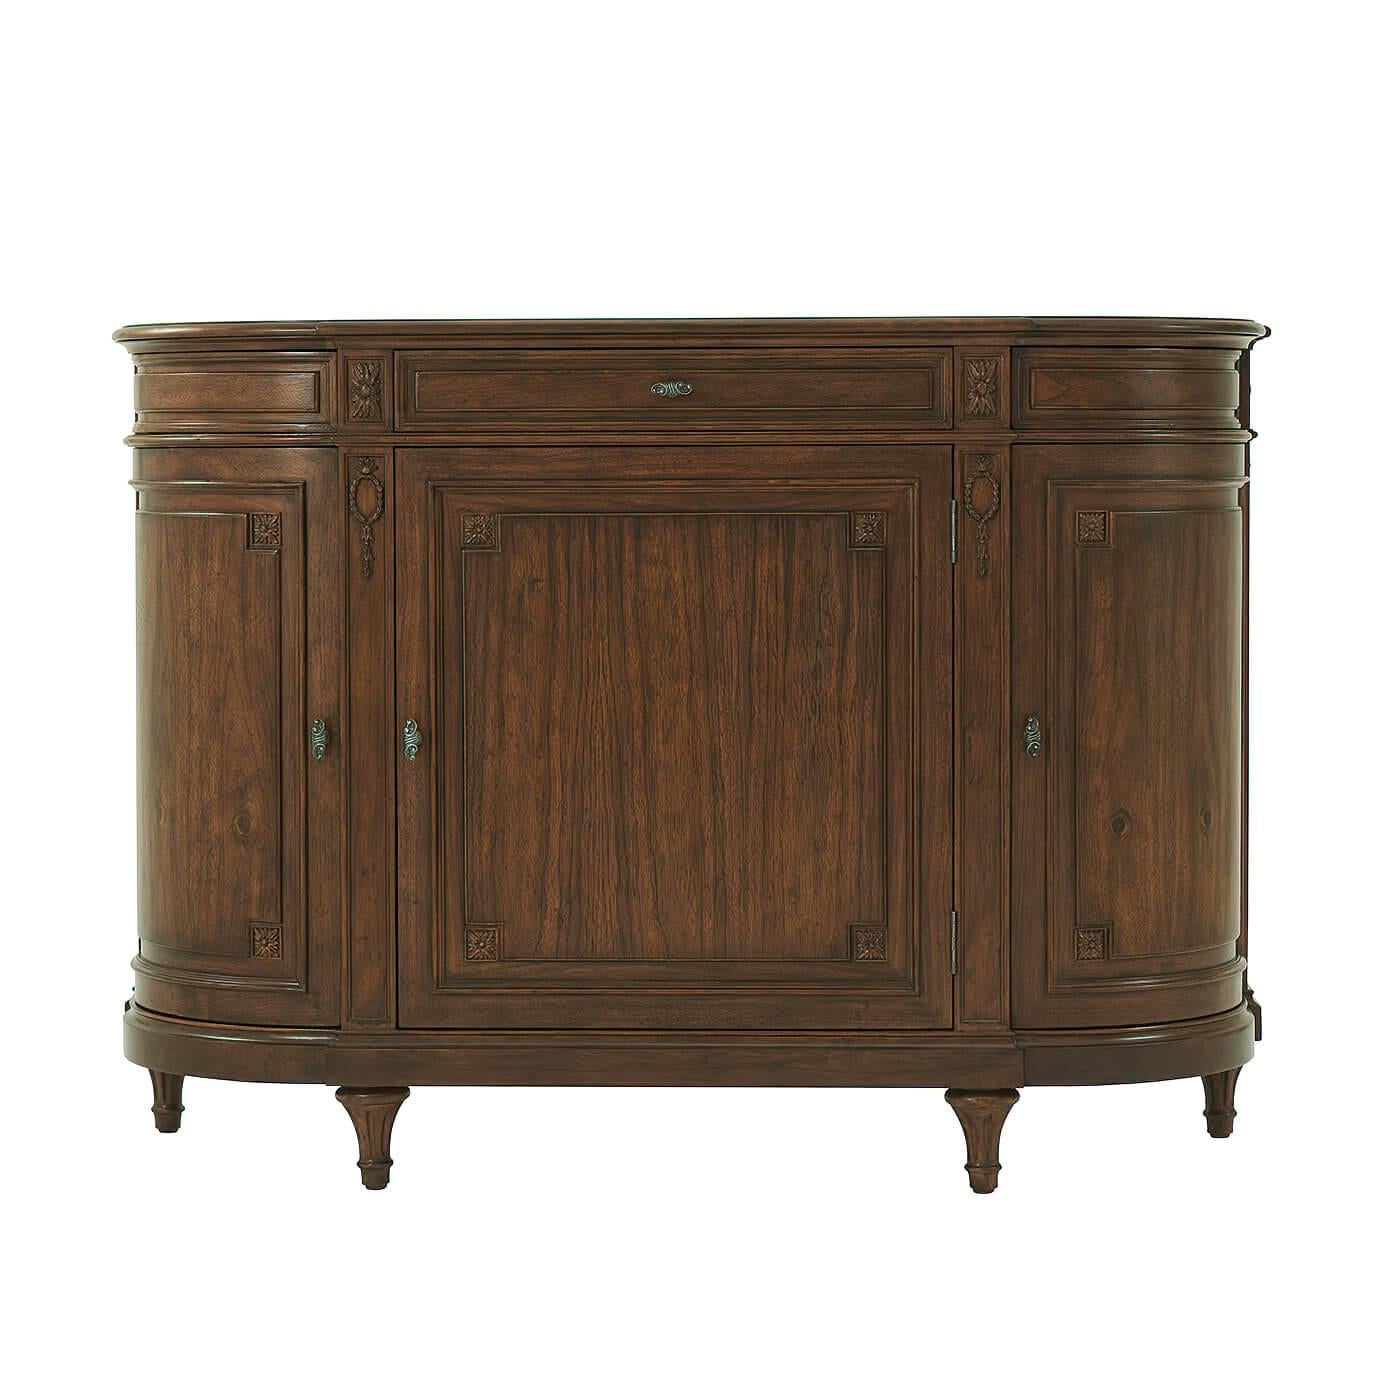 A French Provincial walnut buffet in a demilune form, with a molded and shaped top edge, with a long central frieze drawer, above a three-door cabinet section with shelves to their interiors, also with carved rosettes and raised on a molded base